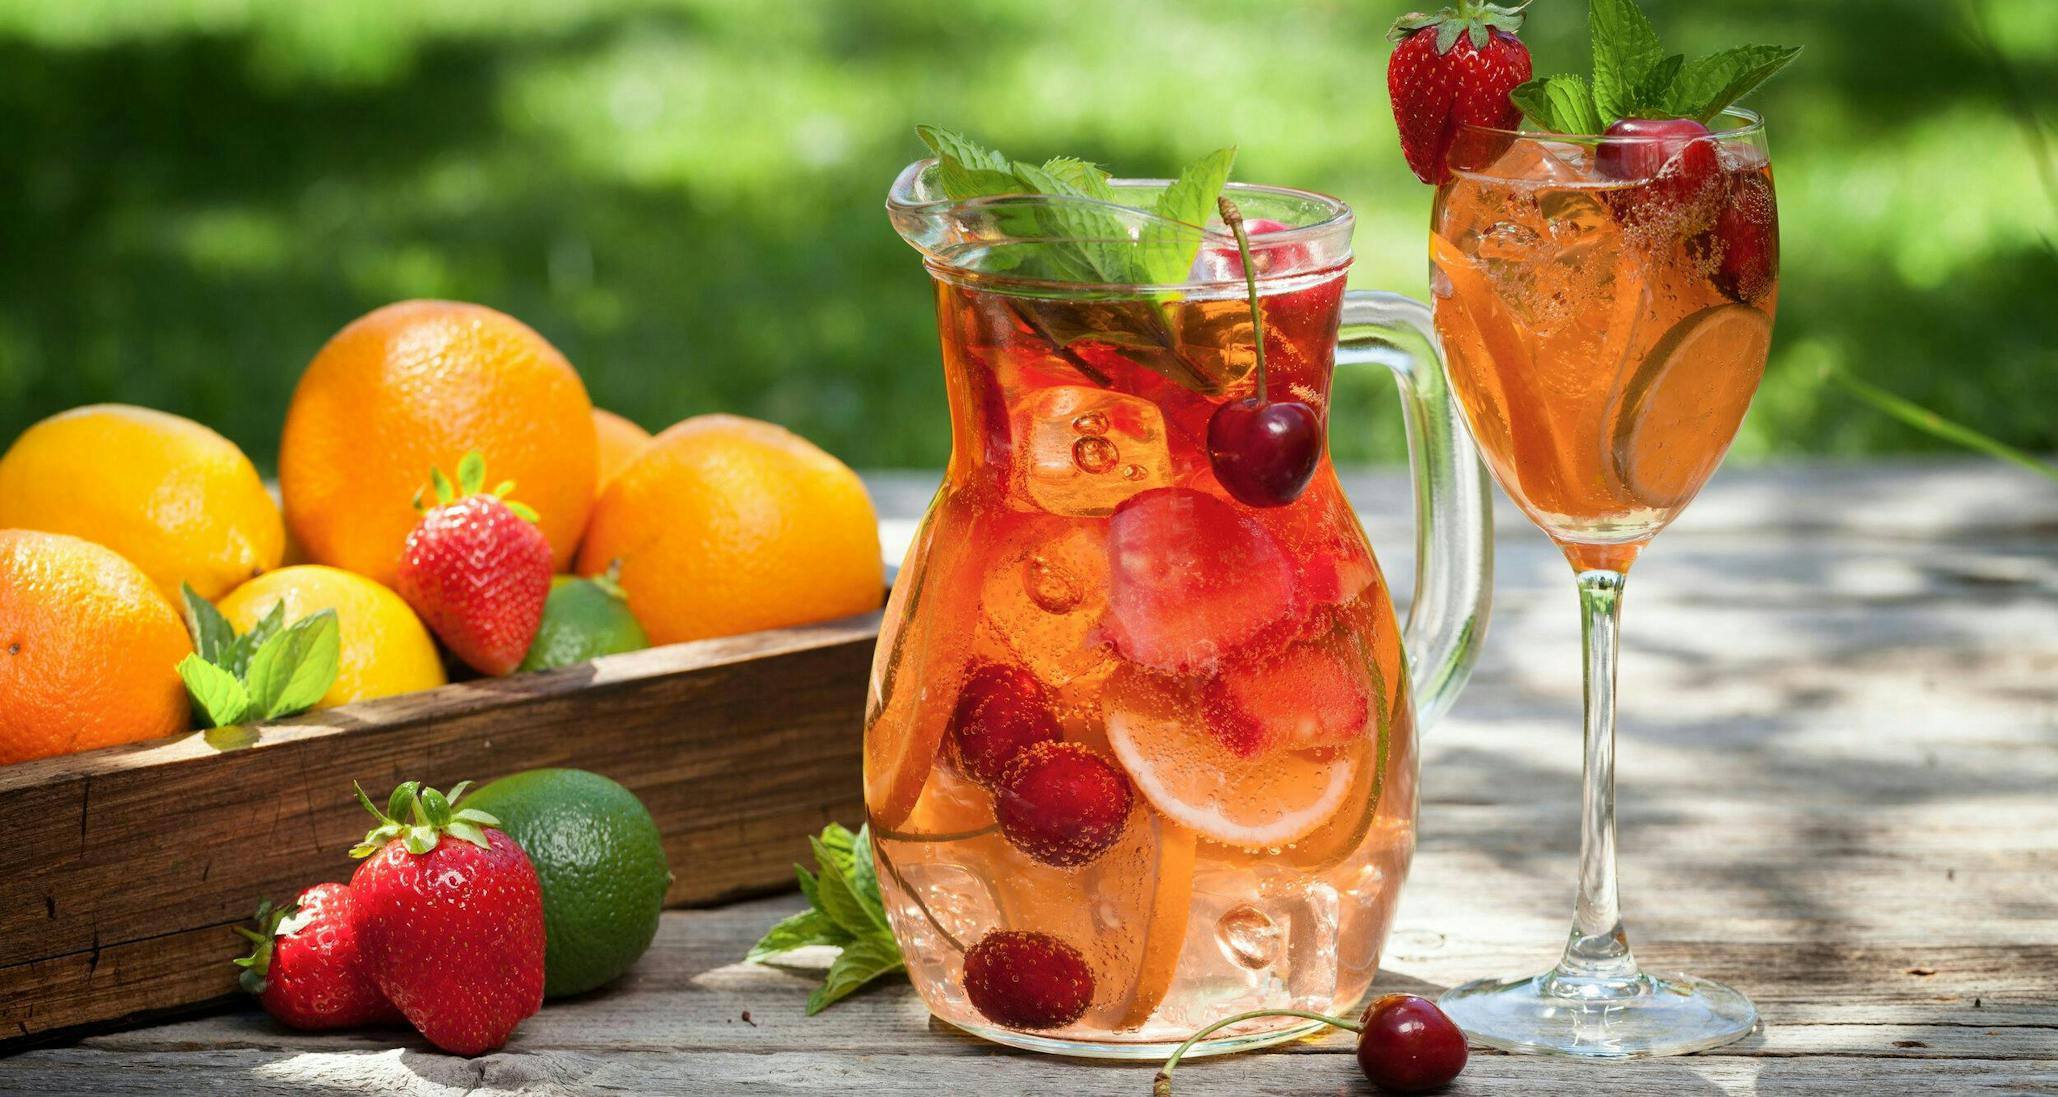 This ginny Pimm's punch will be your go-to throughout the summer!